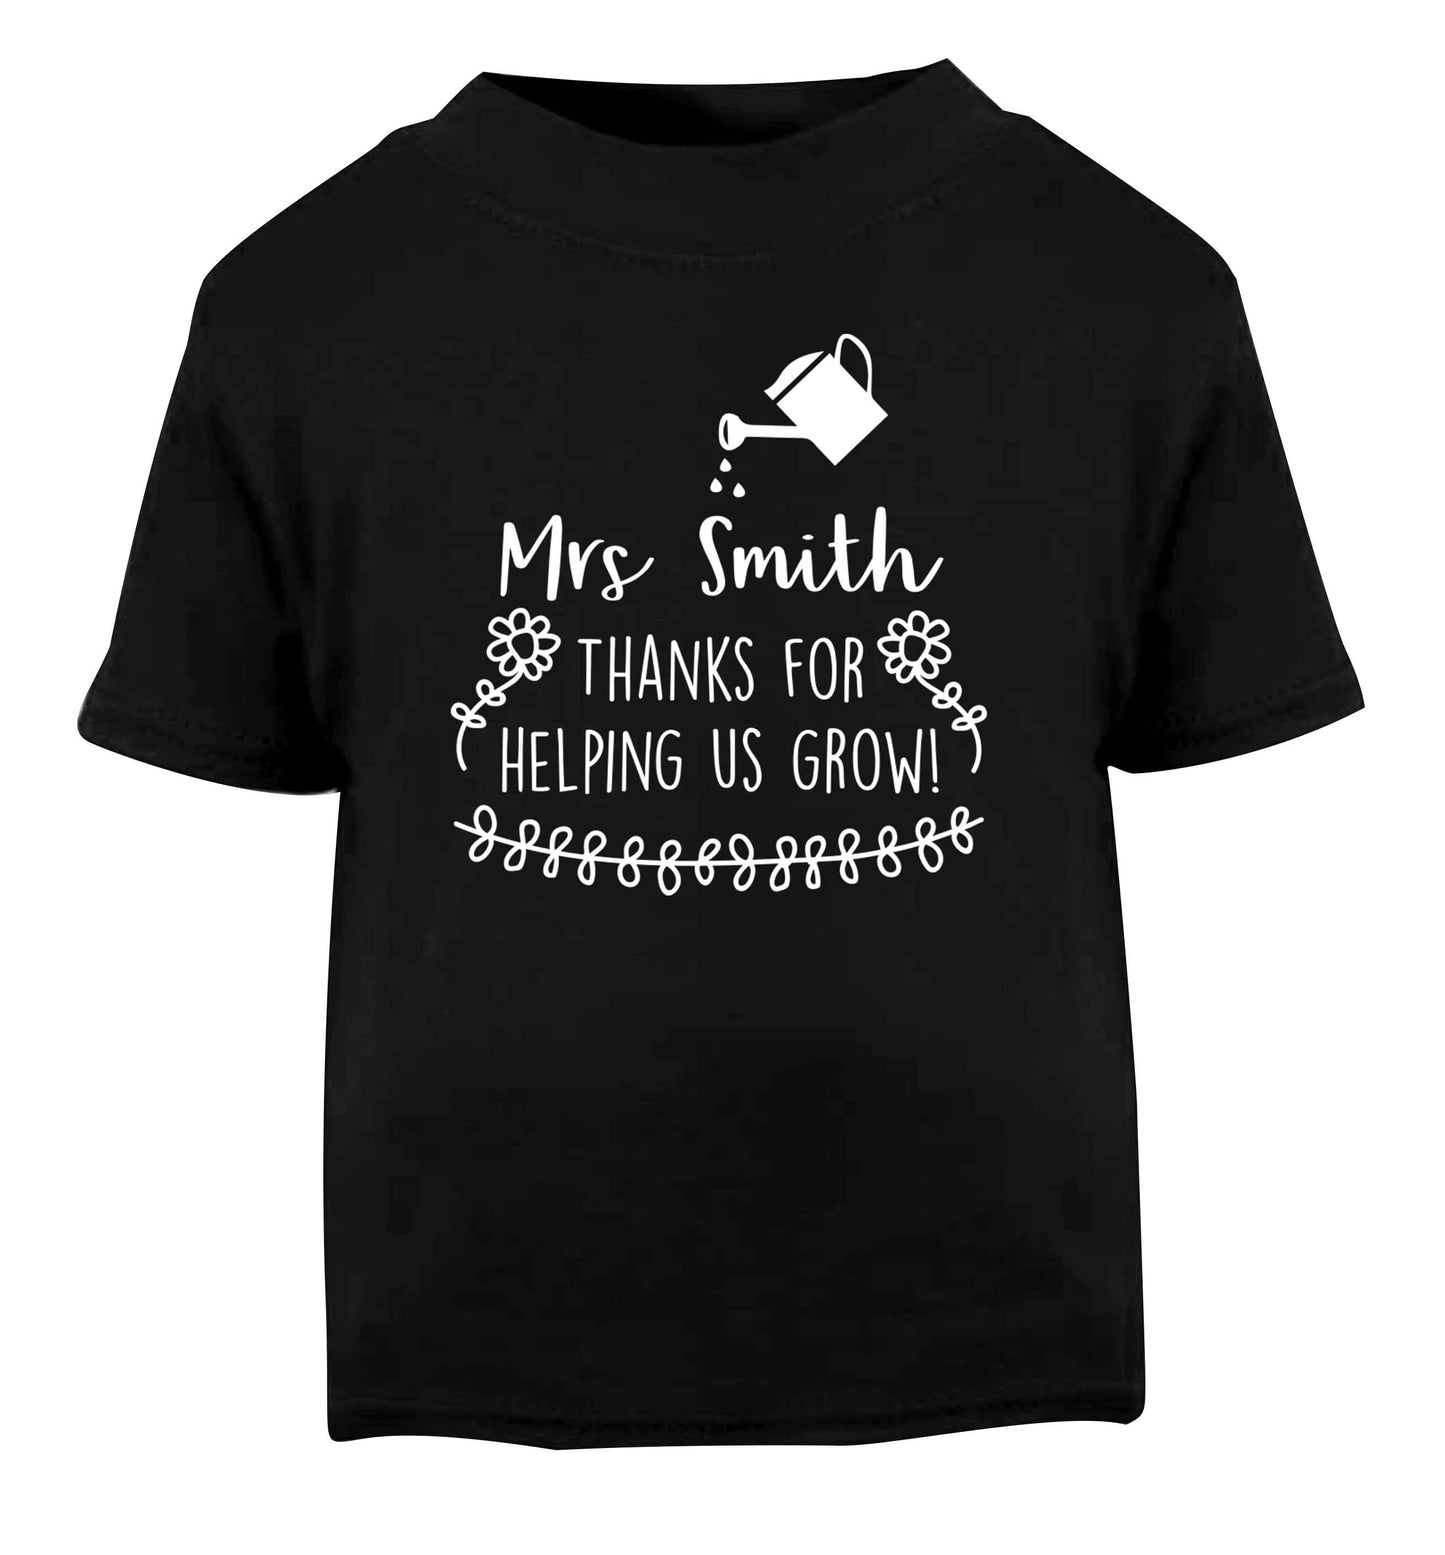 Personalised Mrs Smith thanks for helping us grow Black Baby Toddler Tshirt 2 years